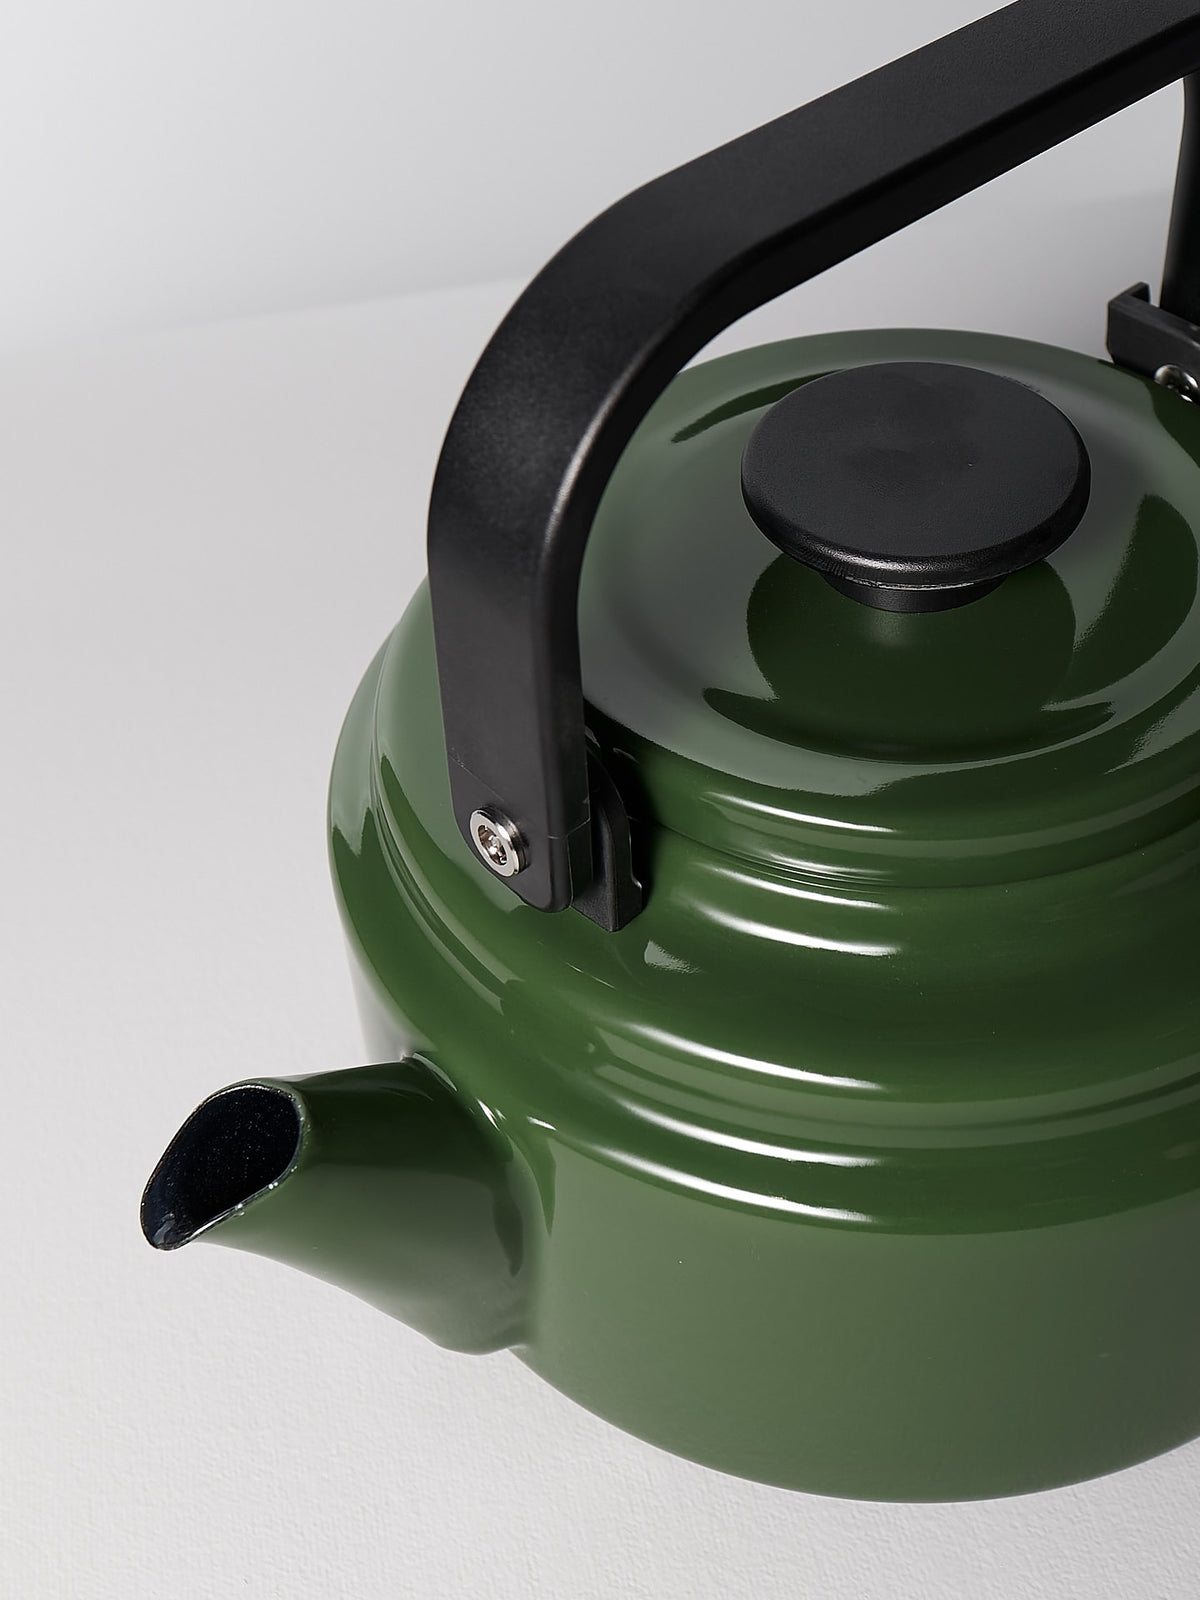 An Amu Stove-top Kettle – Green by Noda Horo on a white surface.